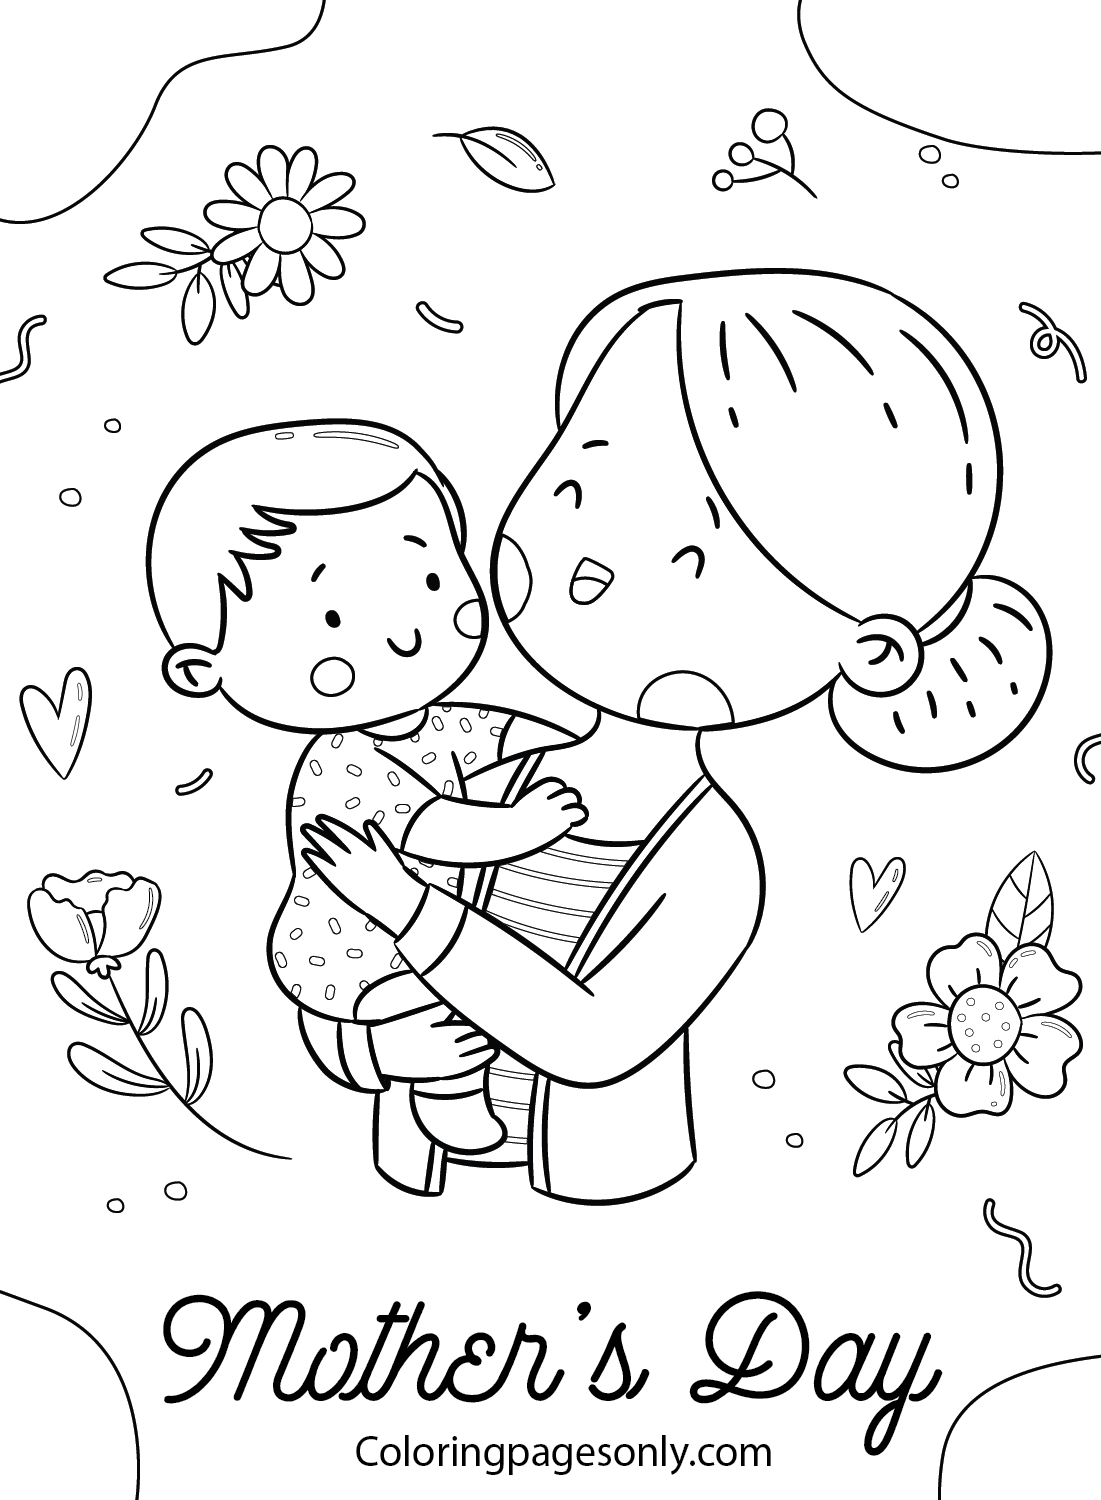 Happy Mothers Day Sheets Coloring Pages Mother's Day Coloring Pages